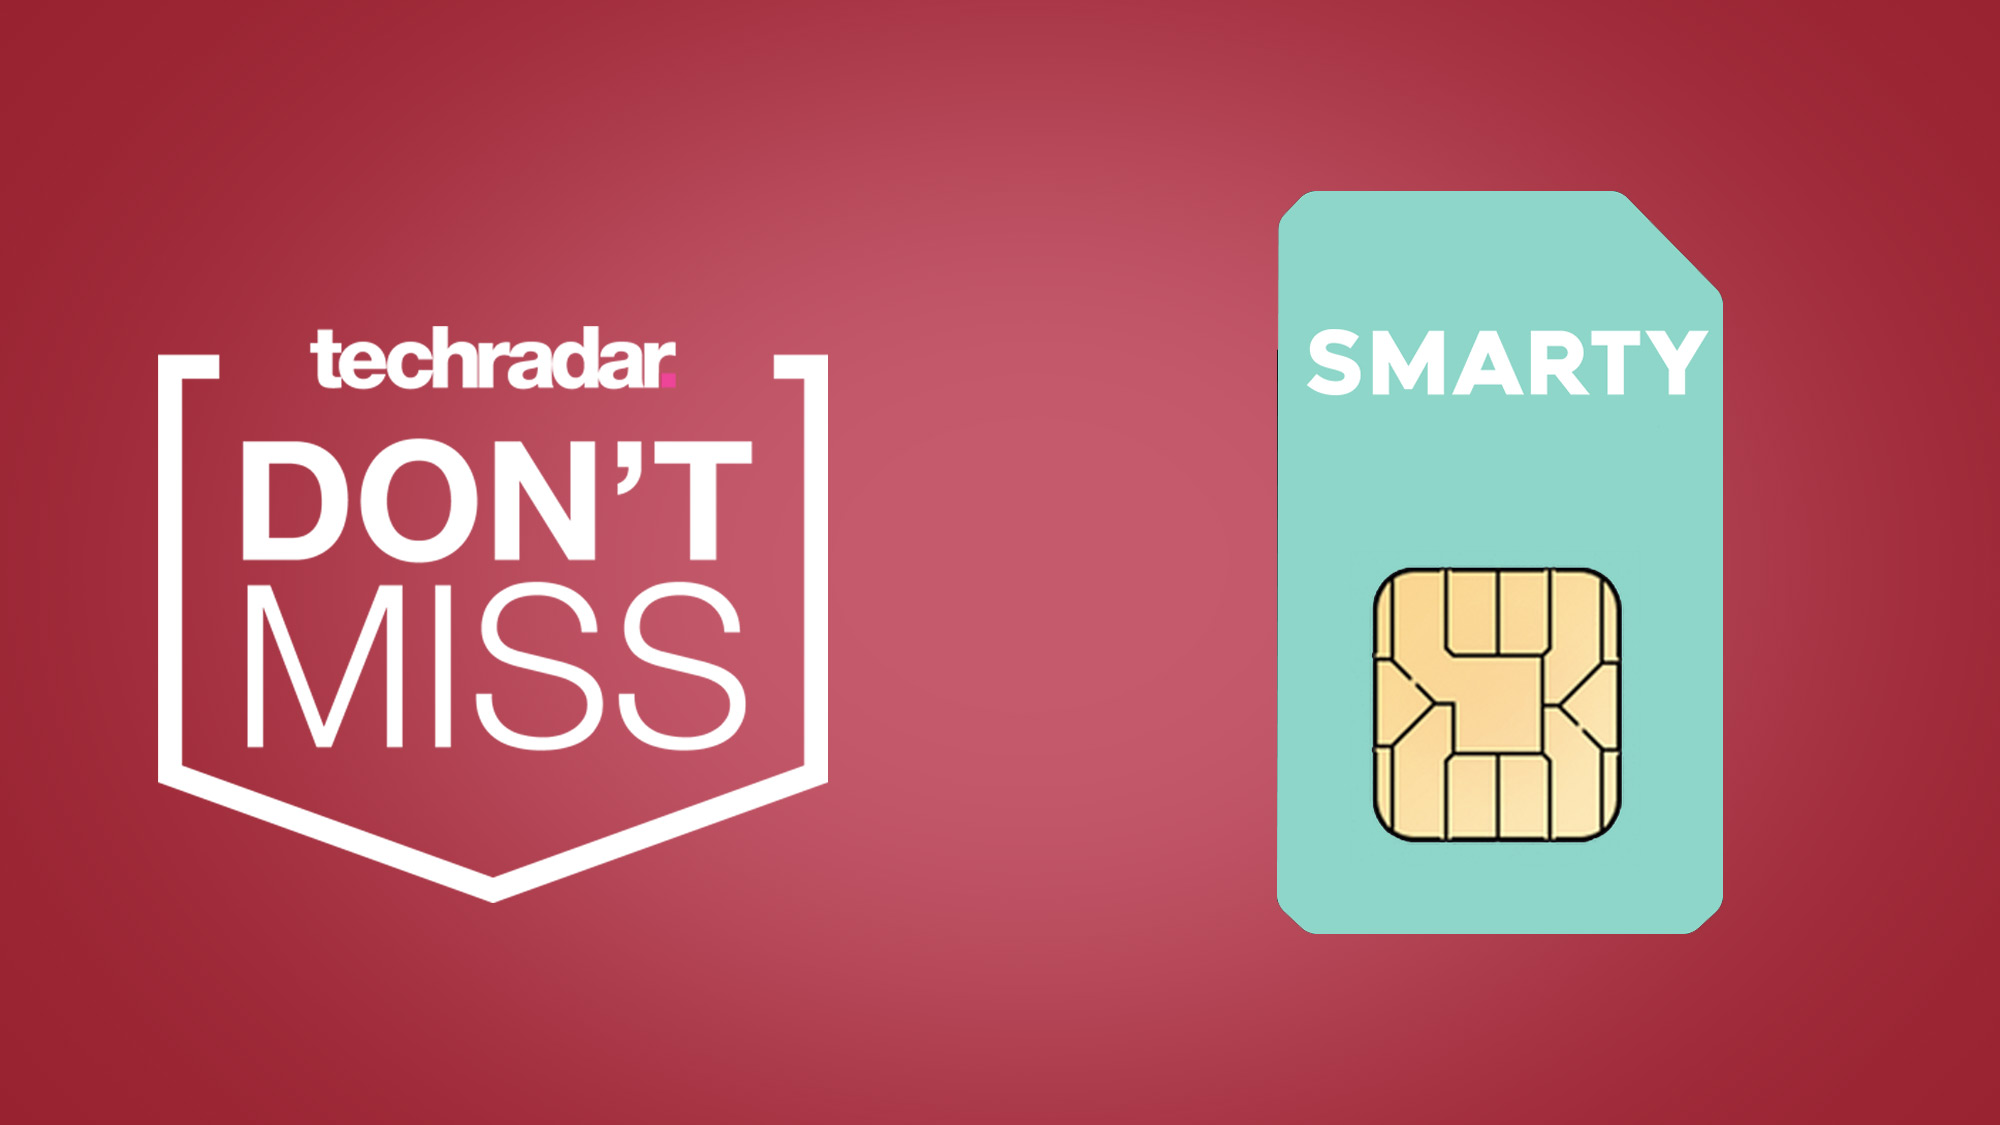 Smarty just dropped another unbeatable value SIM-only deal